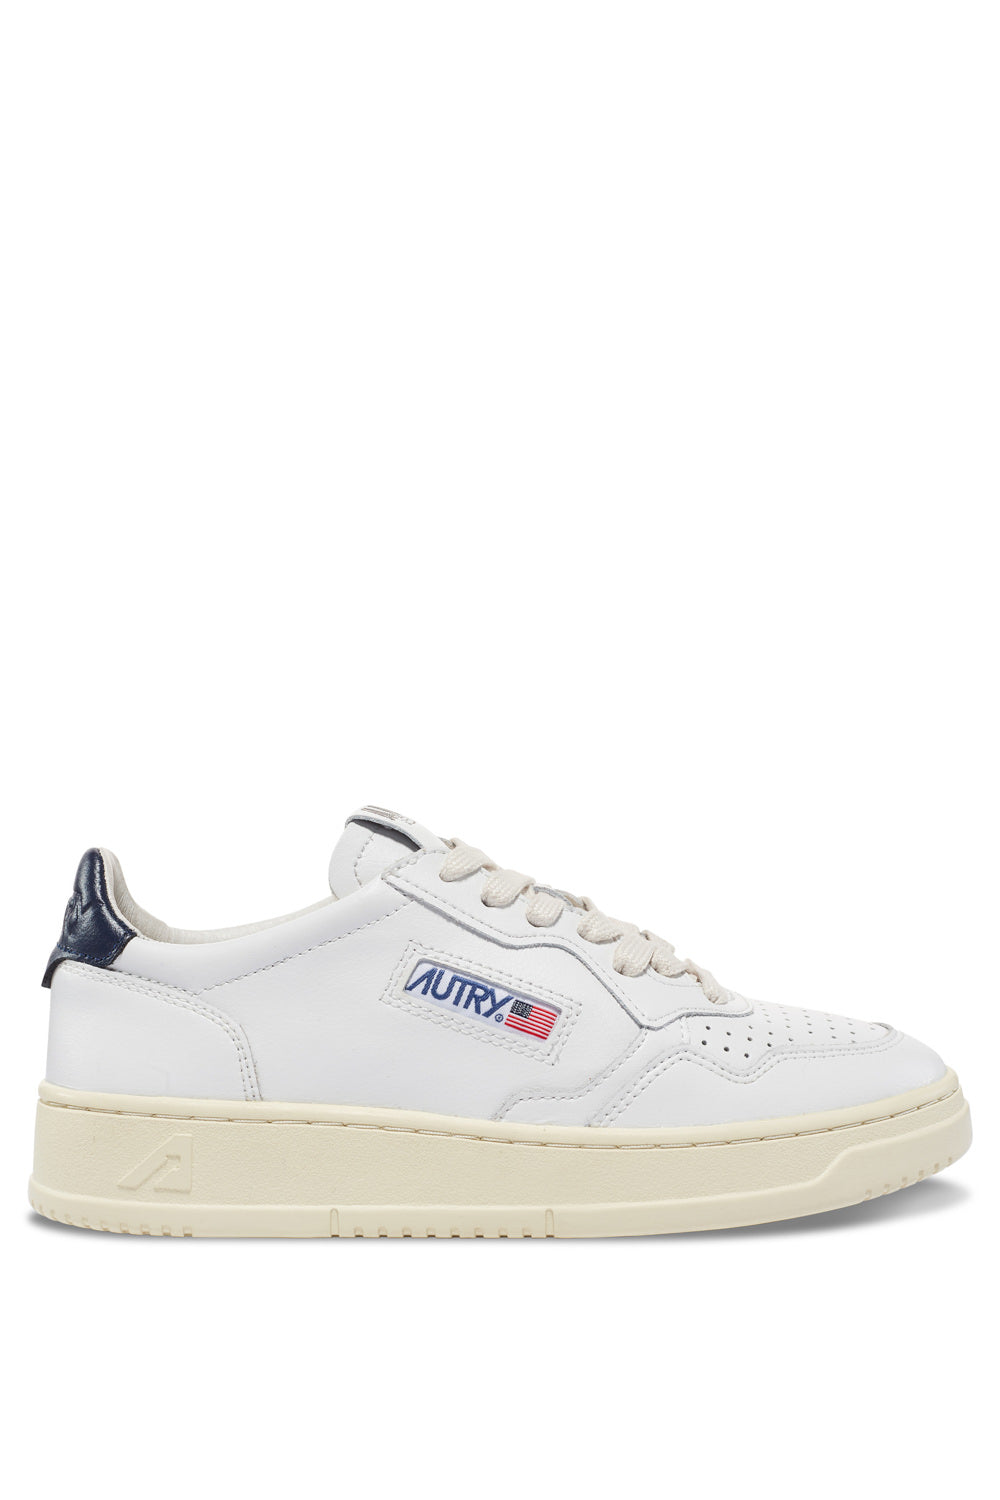 Autry Sneakers Medalist 01 Low Leather Space LL12